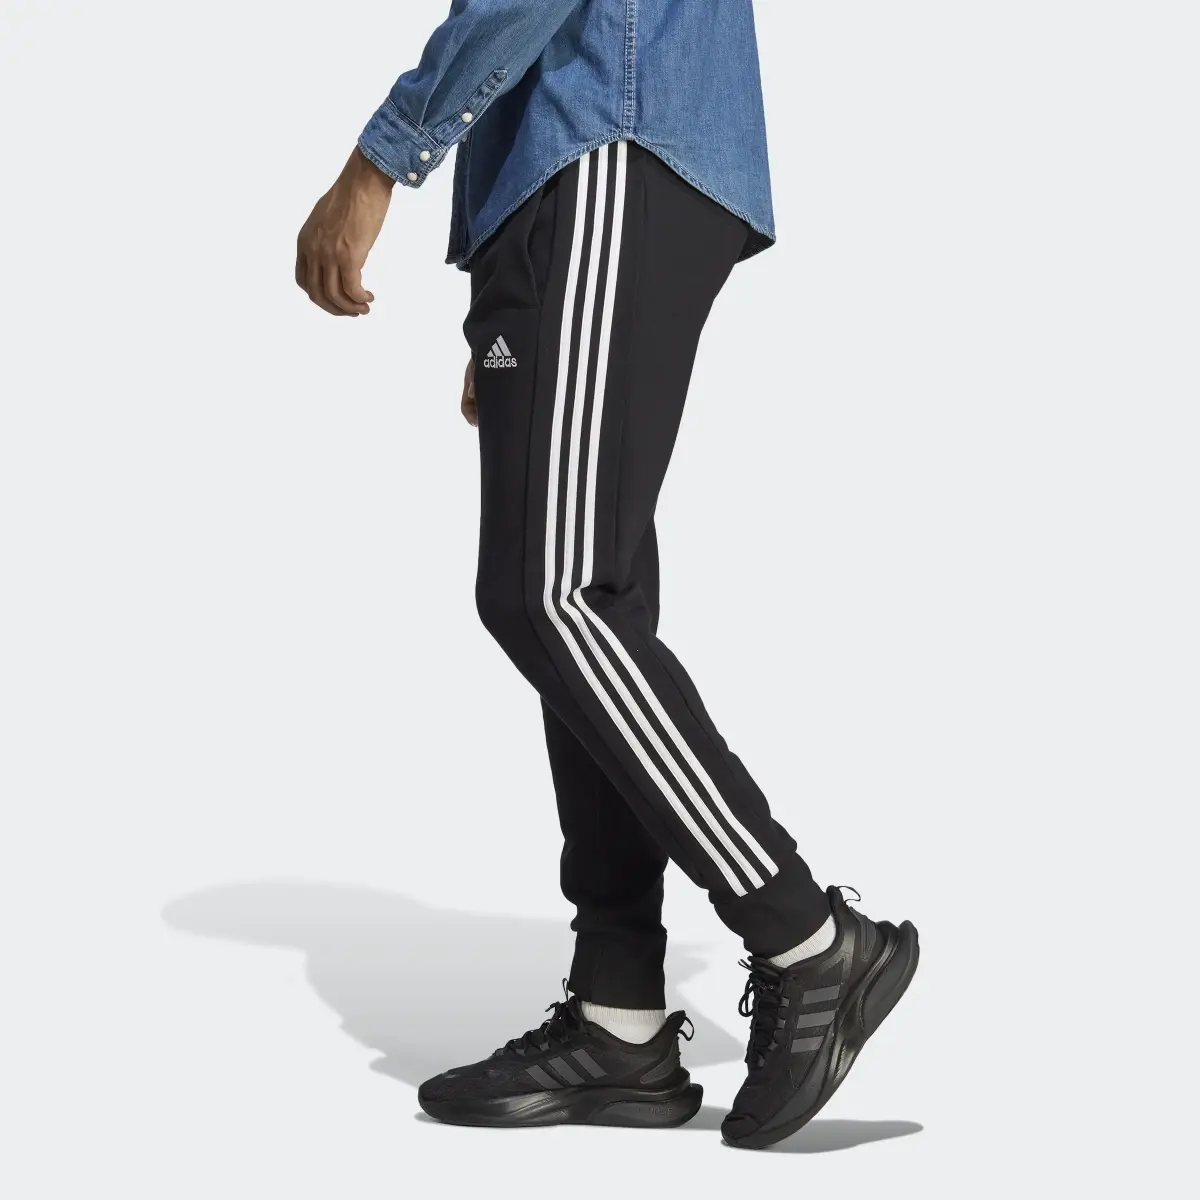 Adidas Essentials French Terry Tapered Cuff 3-Stripes Pants. 2